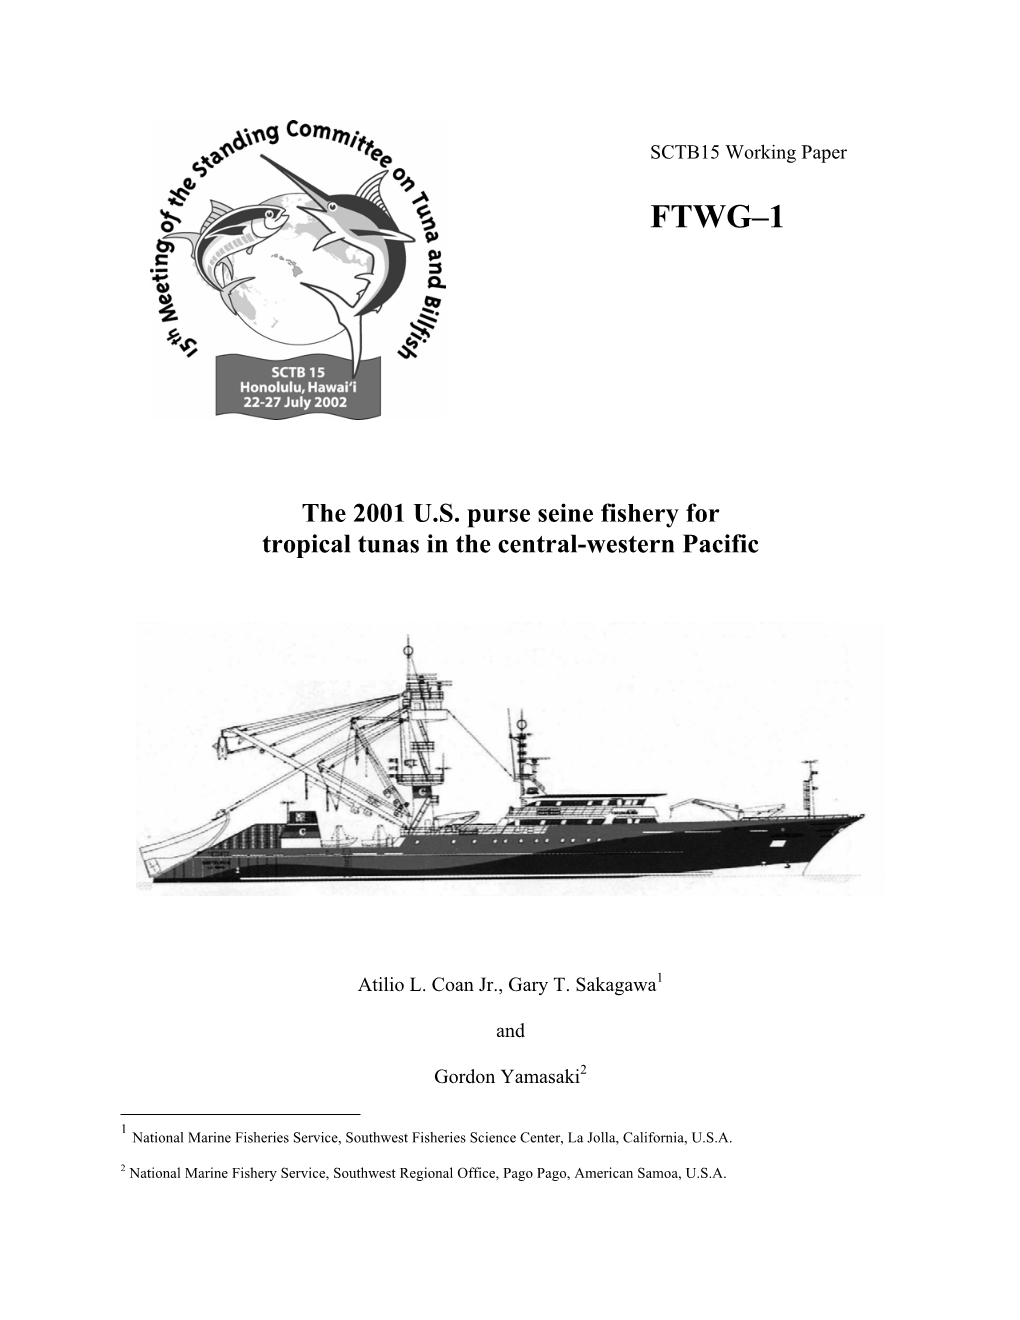 The 2001 U.S. Purse Seine Fishery for Tropical Tunas in the Central-Western Pacific